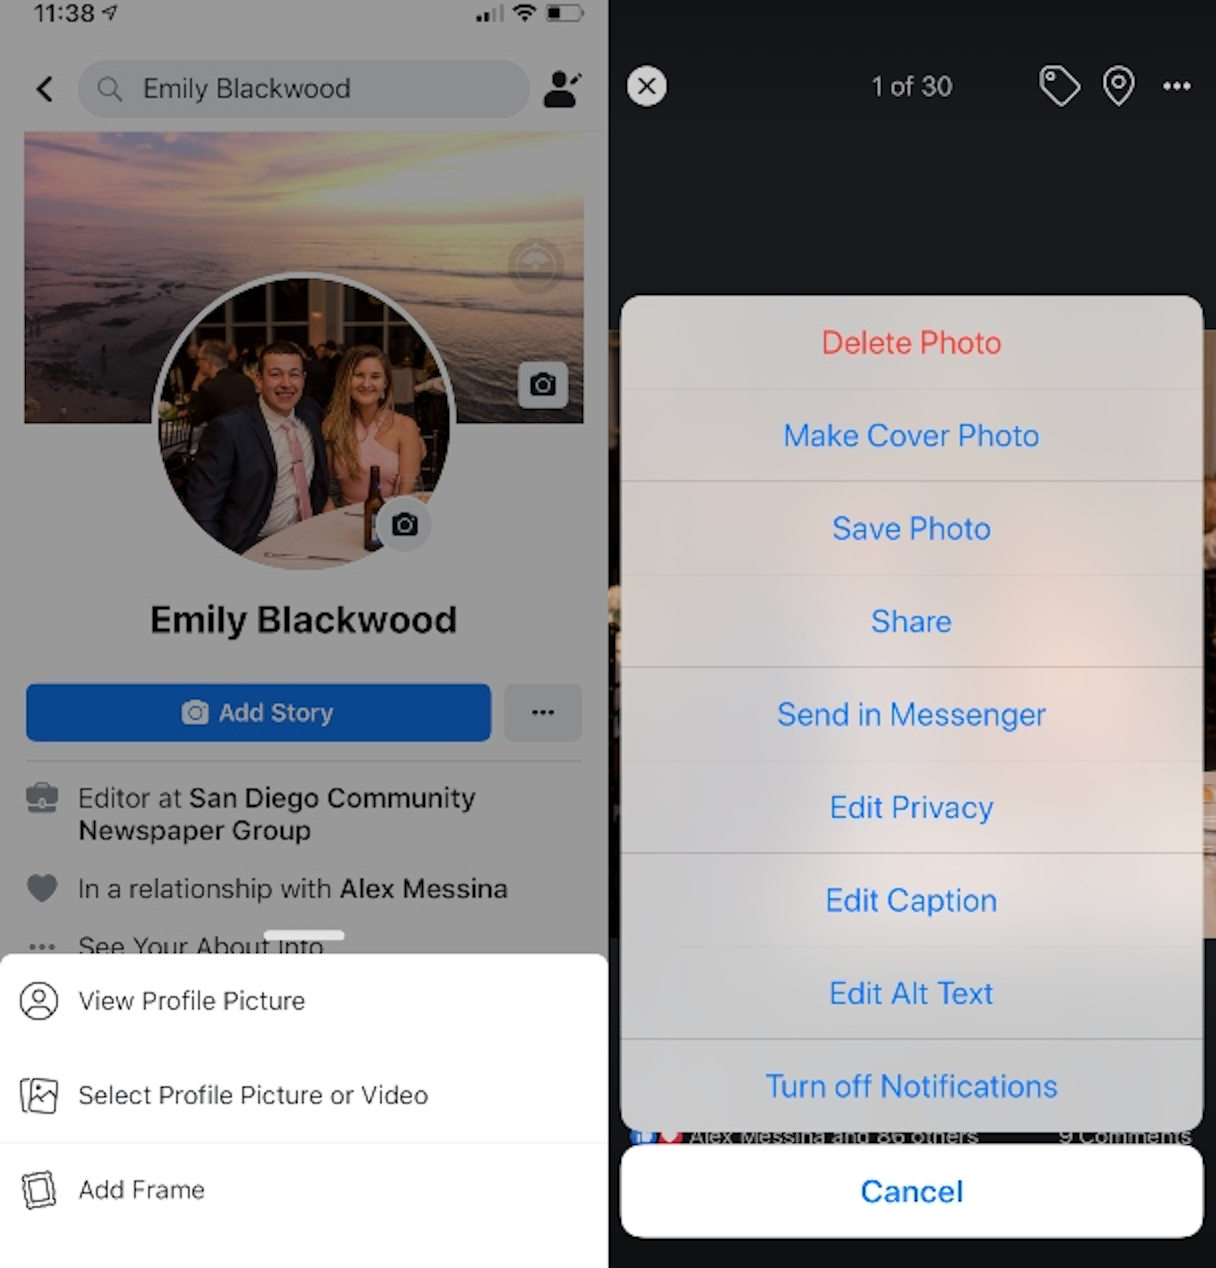 How to download your Facebook photos to an iPhone